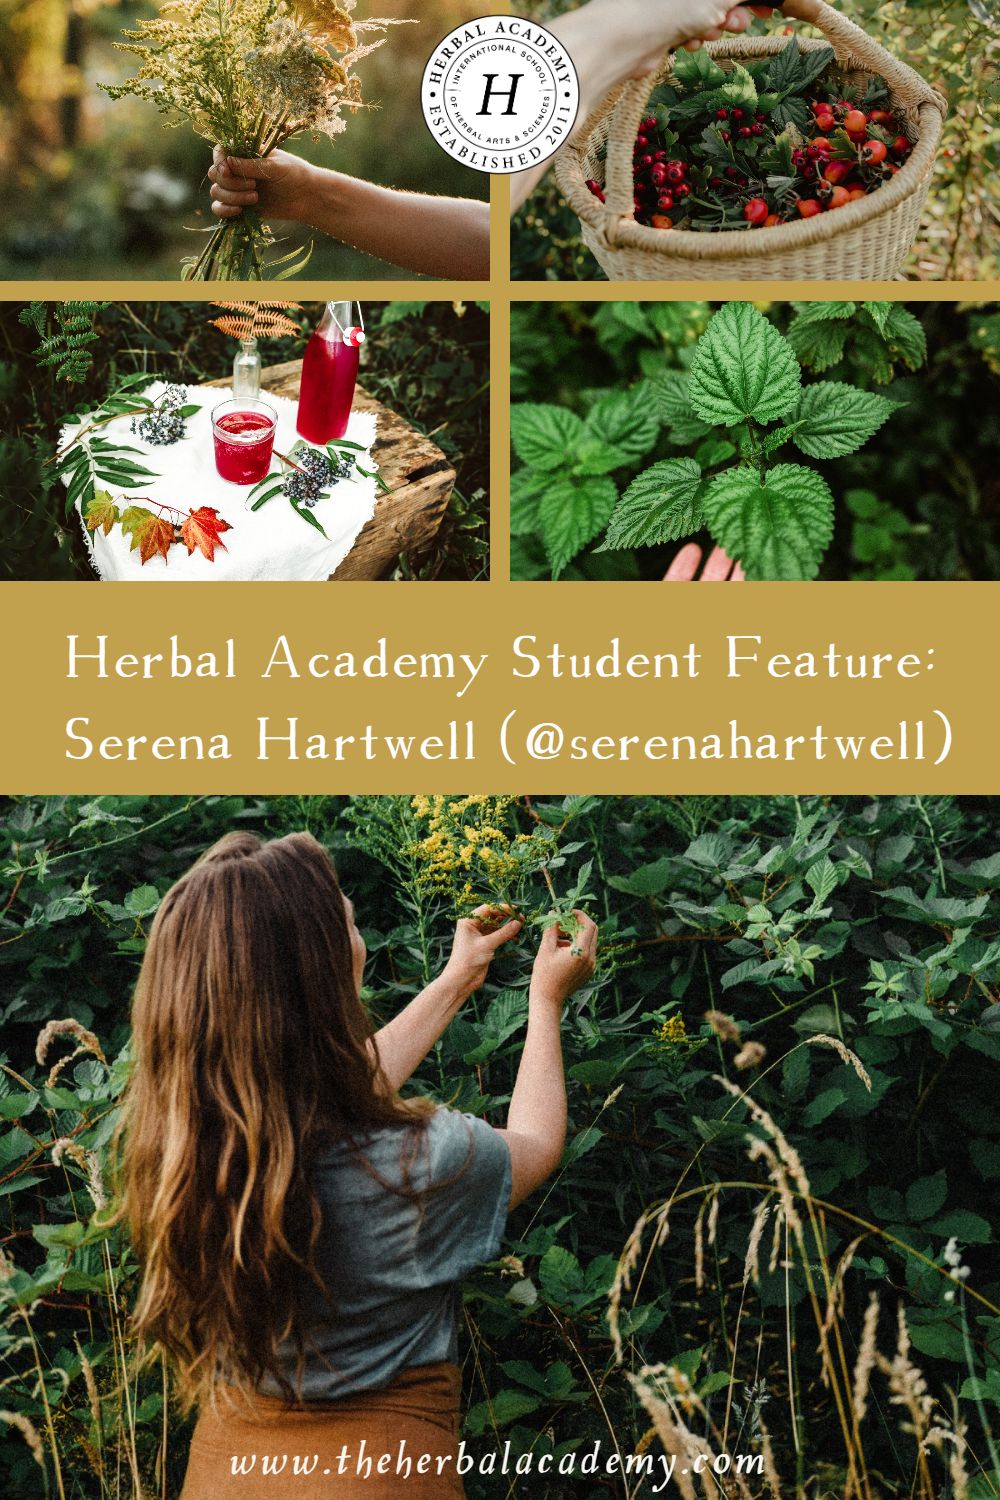 Herbal Academy Student Feature: Serena Hartwell (@serenahartwell) | Herbal Academy | In this Student Feature, we spoke with Serena Hartwell of Everyday Homestead, where she shares foraging tips and wildcrafted recipes.